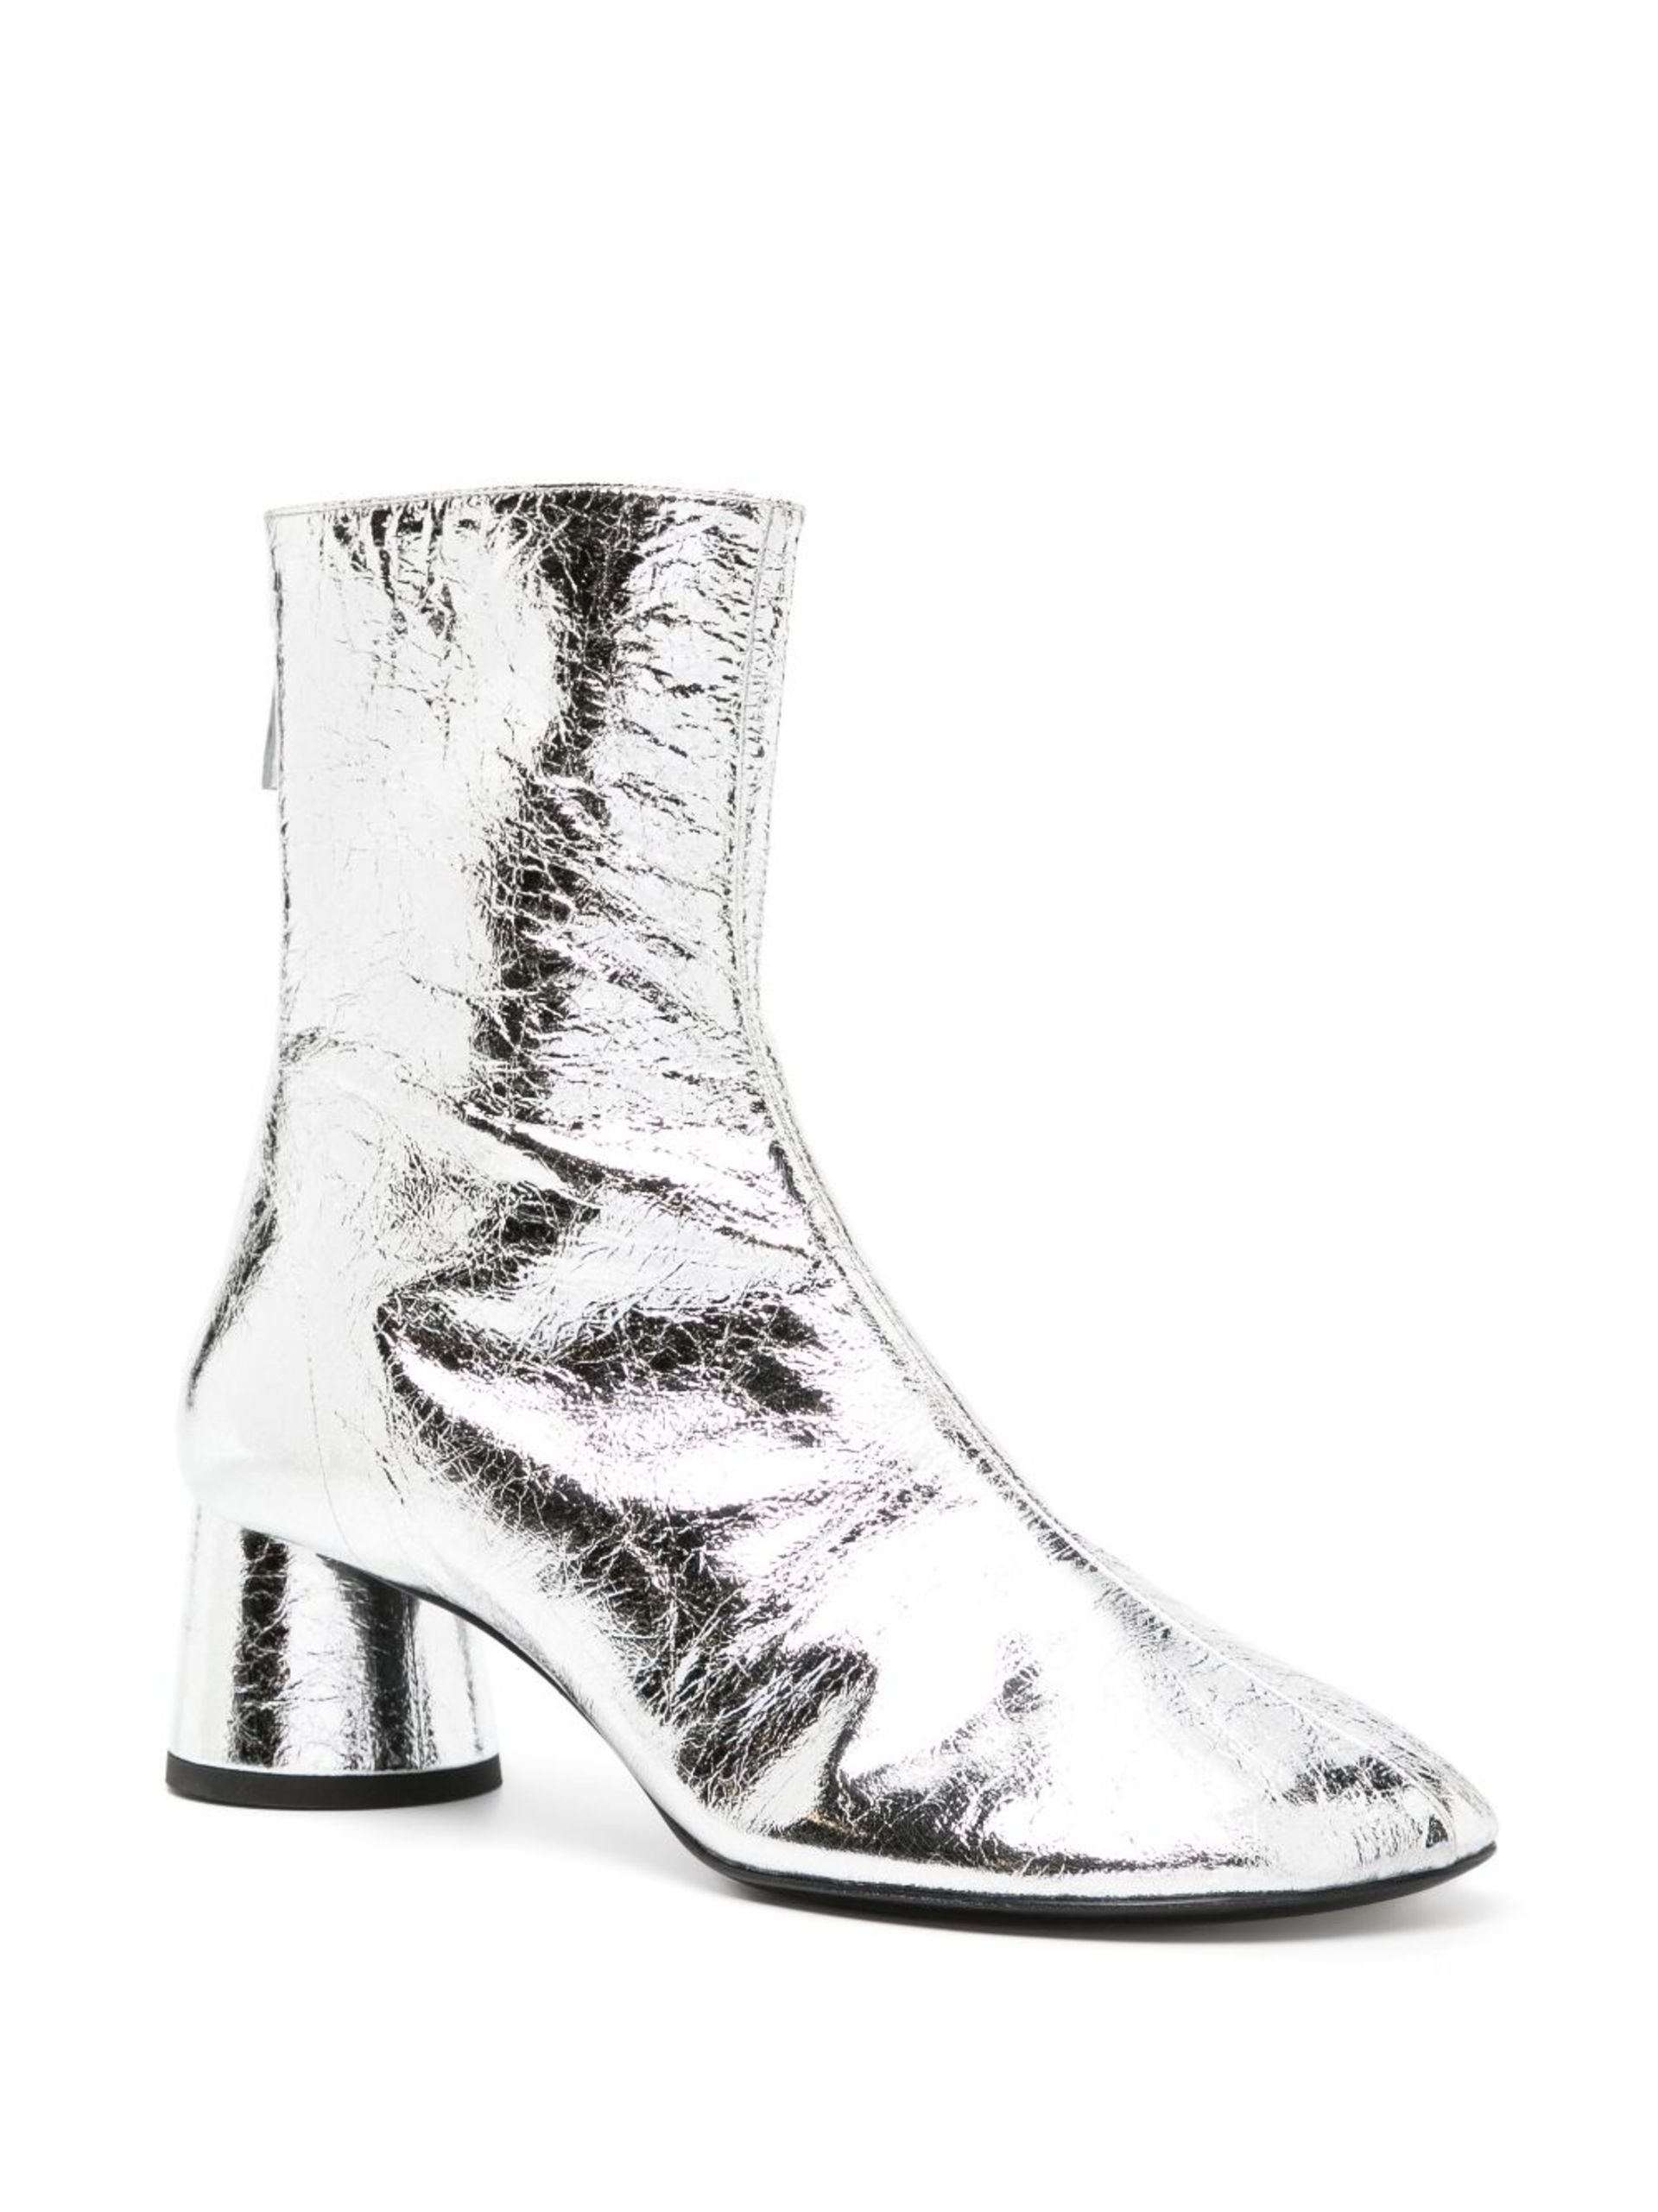 silver Glove 55 leather ankle boots - 2